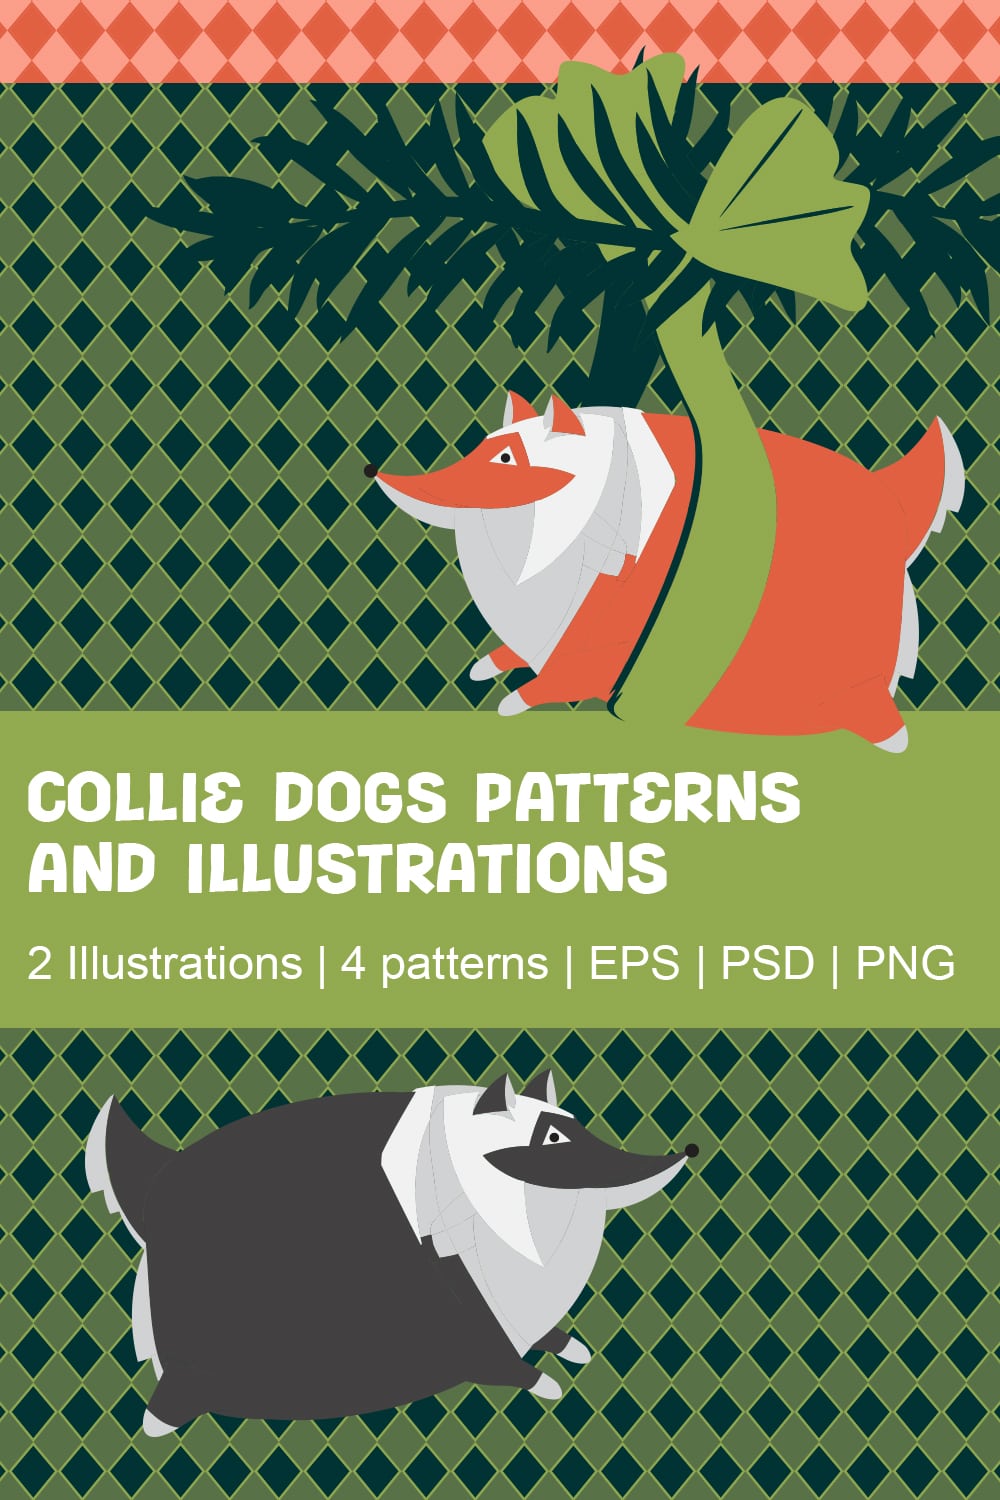 Exclusive cute and modern new year style Collie Dog illustrations and patterns Colored background patterns Holiday Illustration clip art bundle, Cartoon Illustration pinterest preview image.